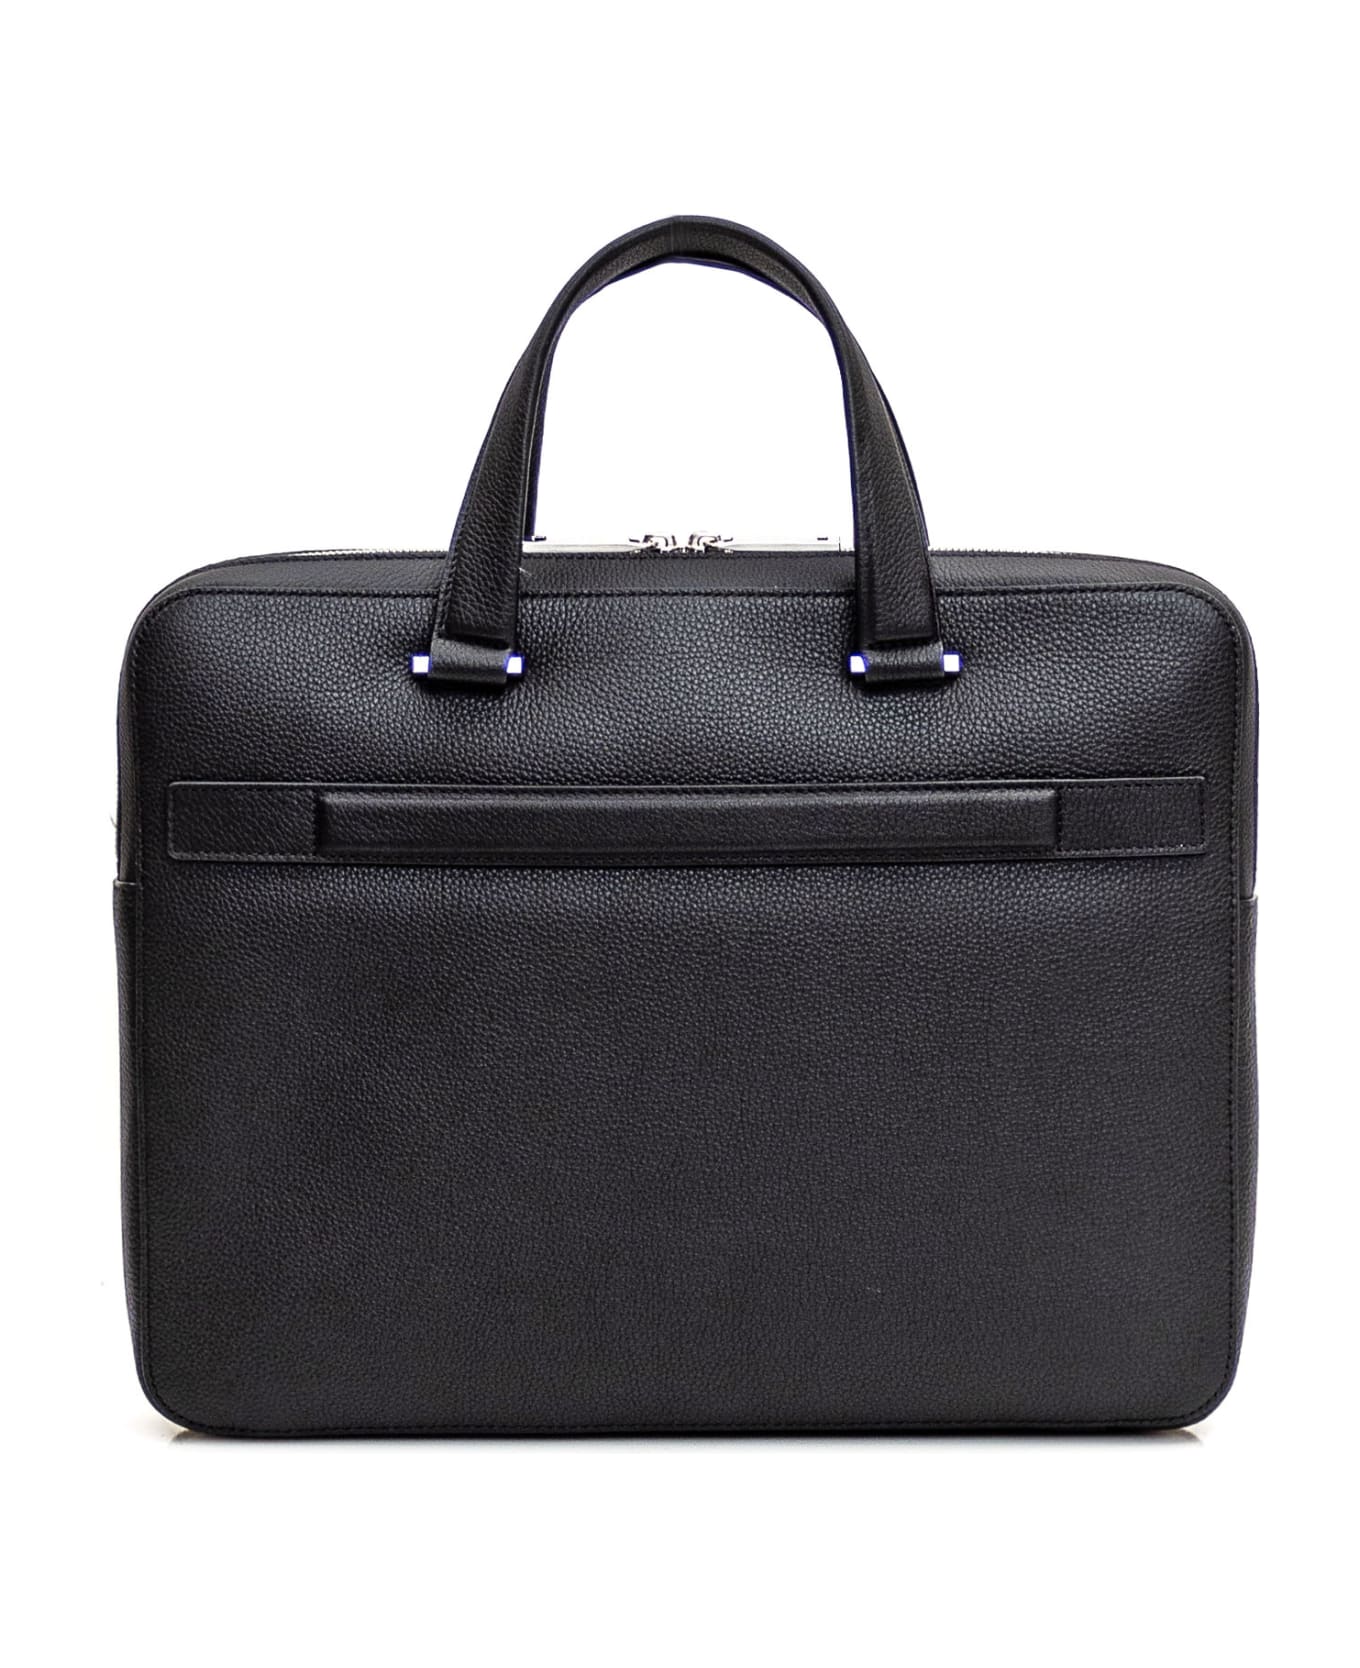 Ferragamo Business Bag With Embossing Material - NERO